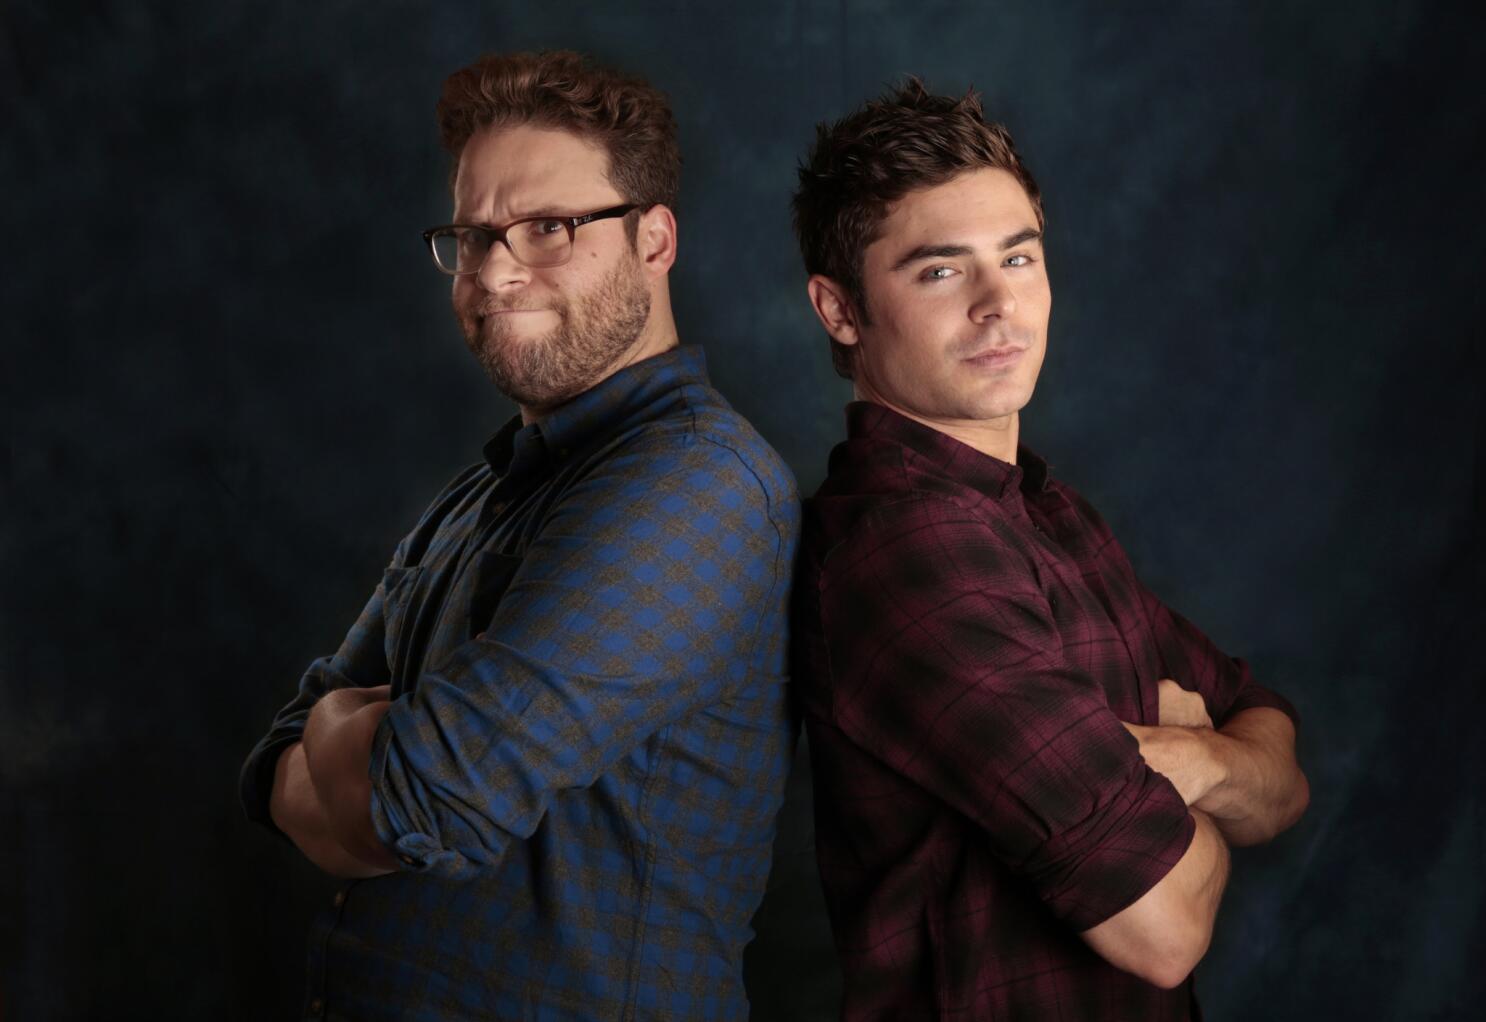 Neighbors' movie review: Seth Rogen gets schooled in frat-house comedy, Movies/TV